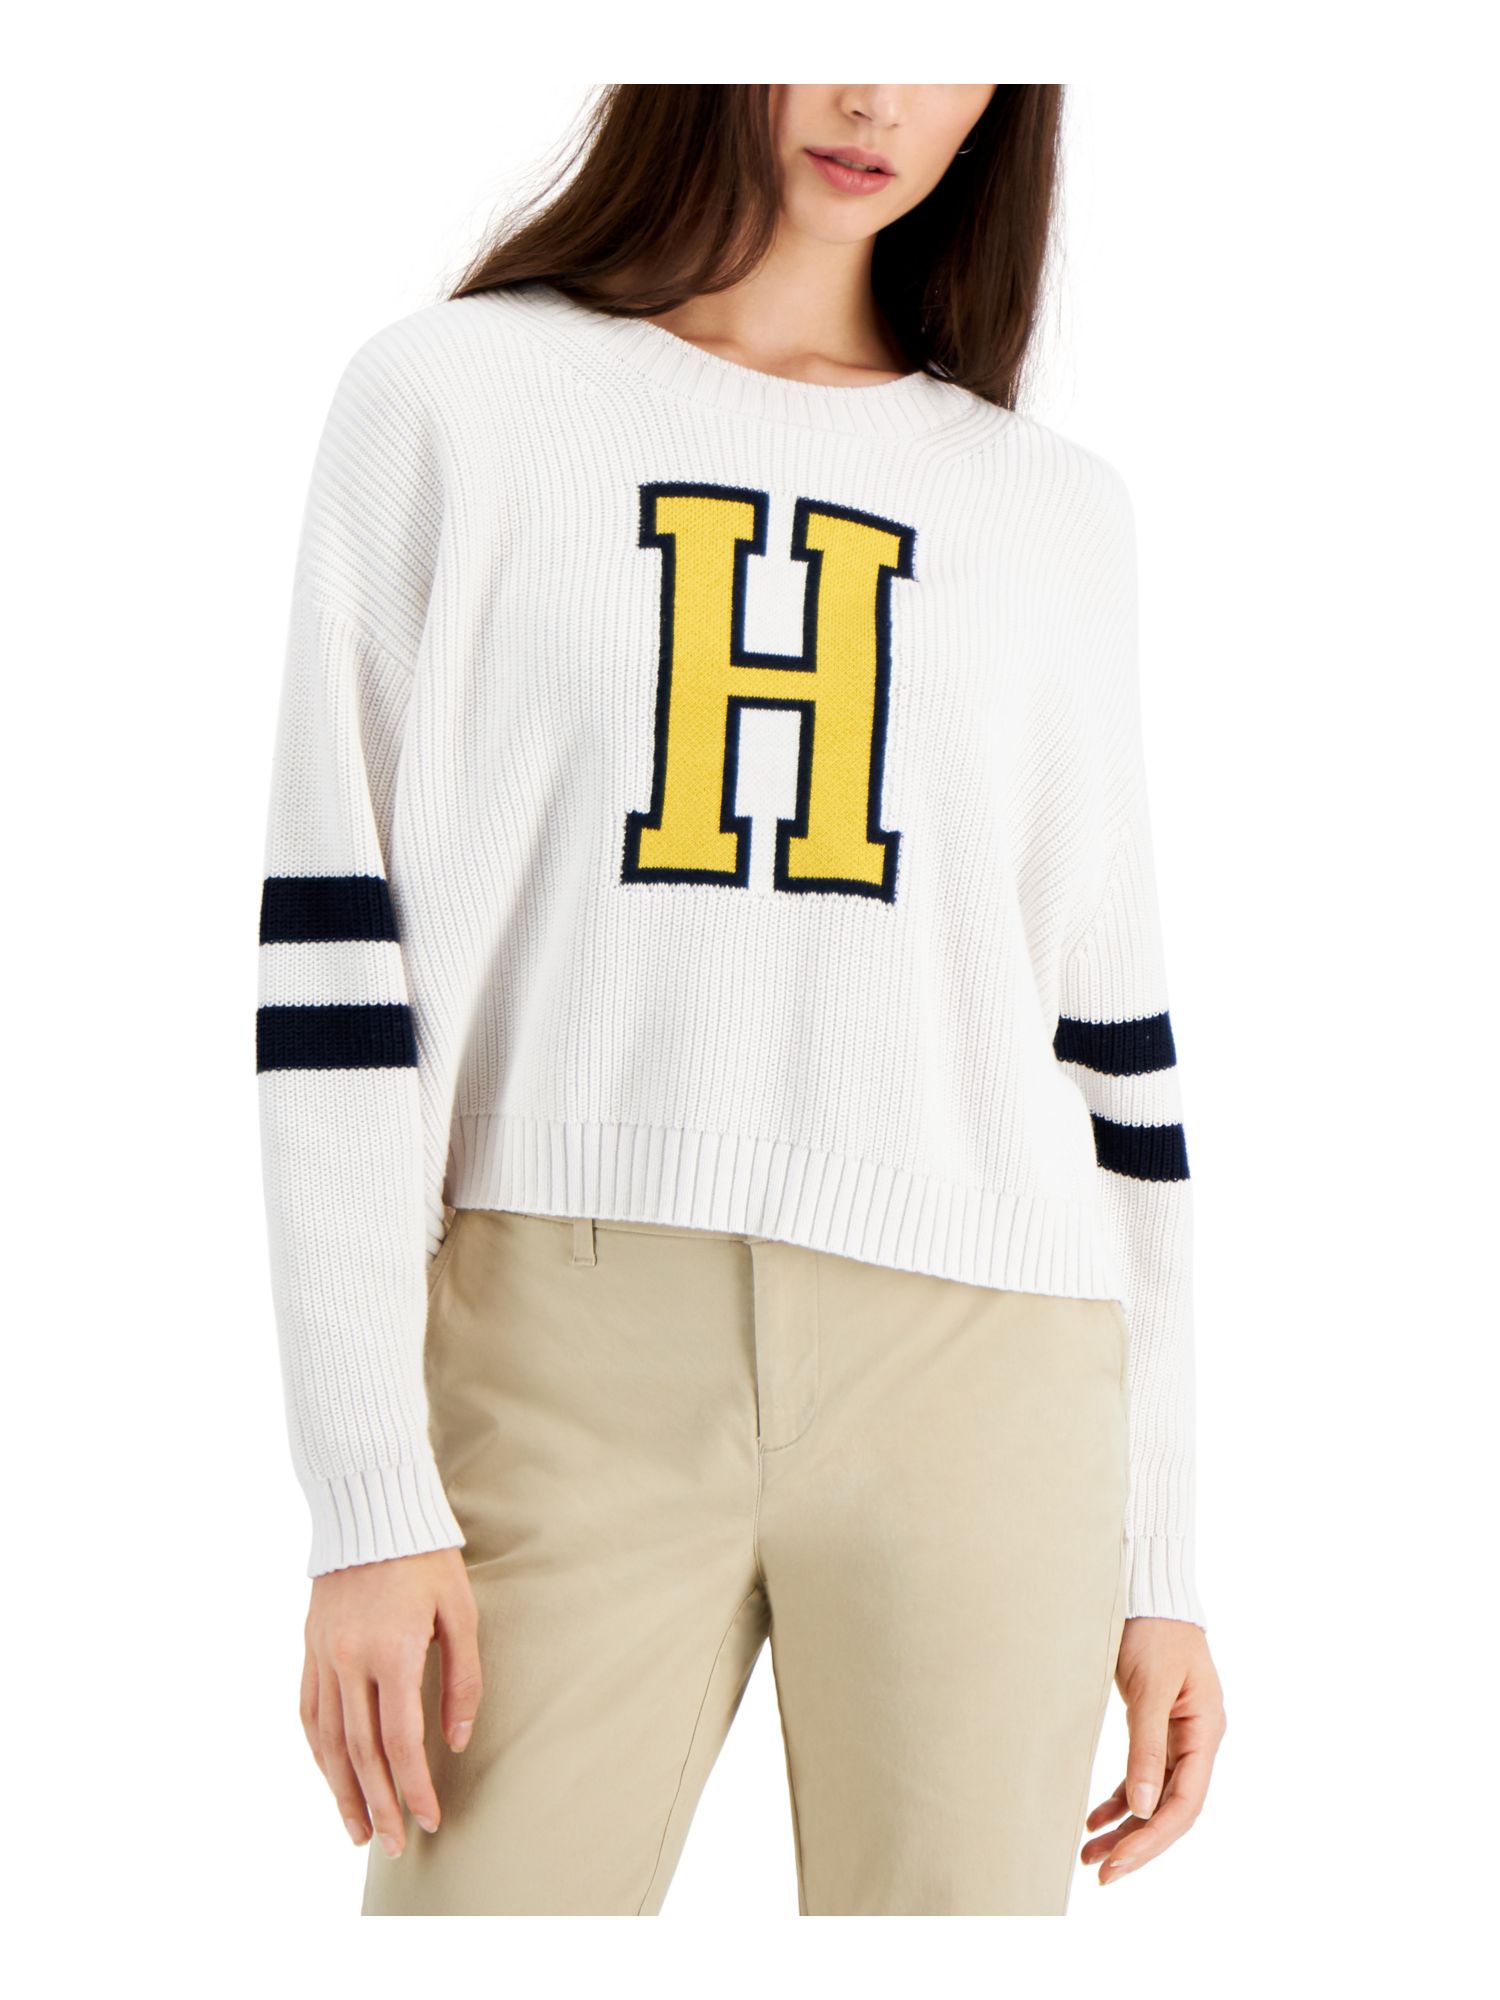 TOMMY HILFIGER Womens White Ribbed Short Length Knit Graphic Long Sleeve Crew Neck Sweater S